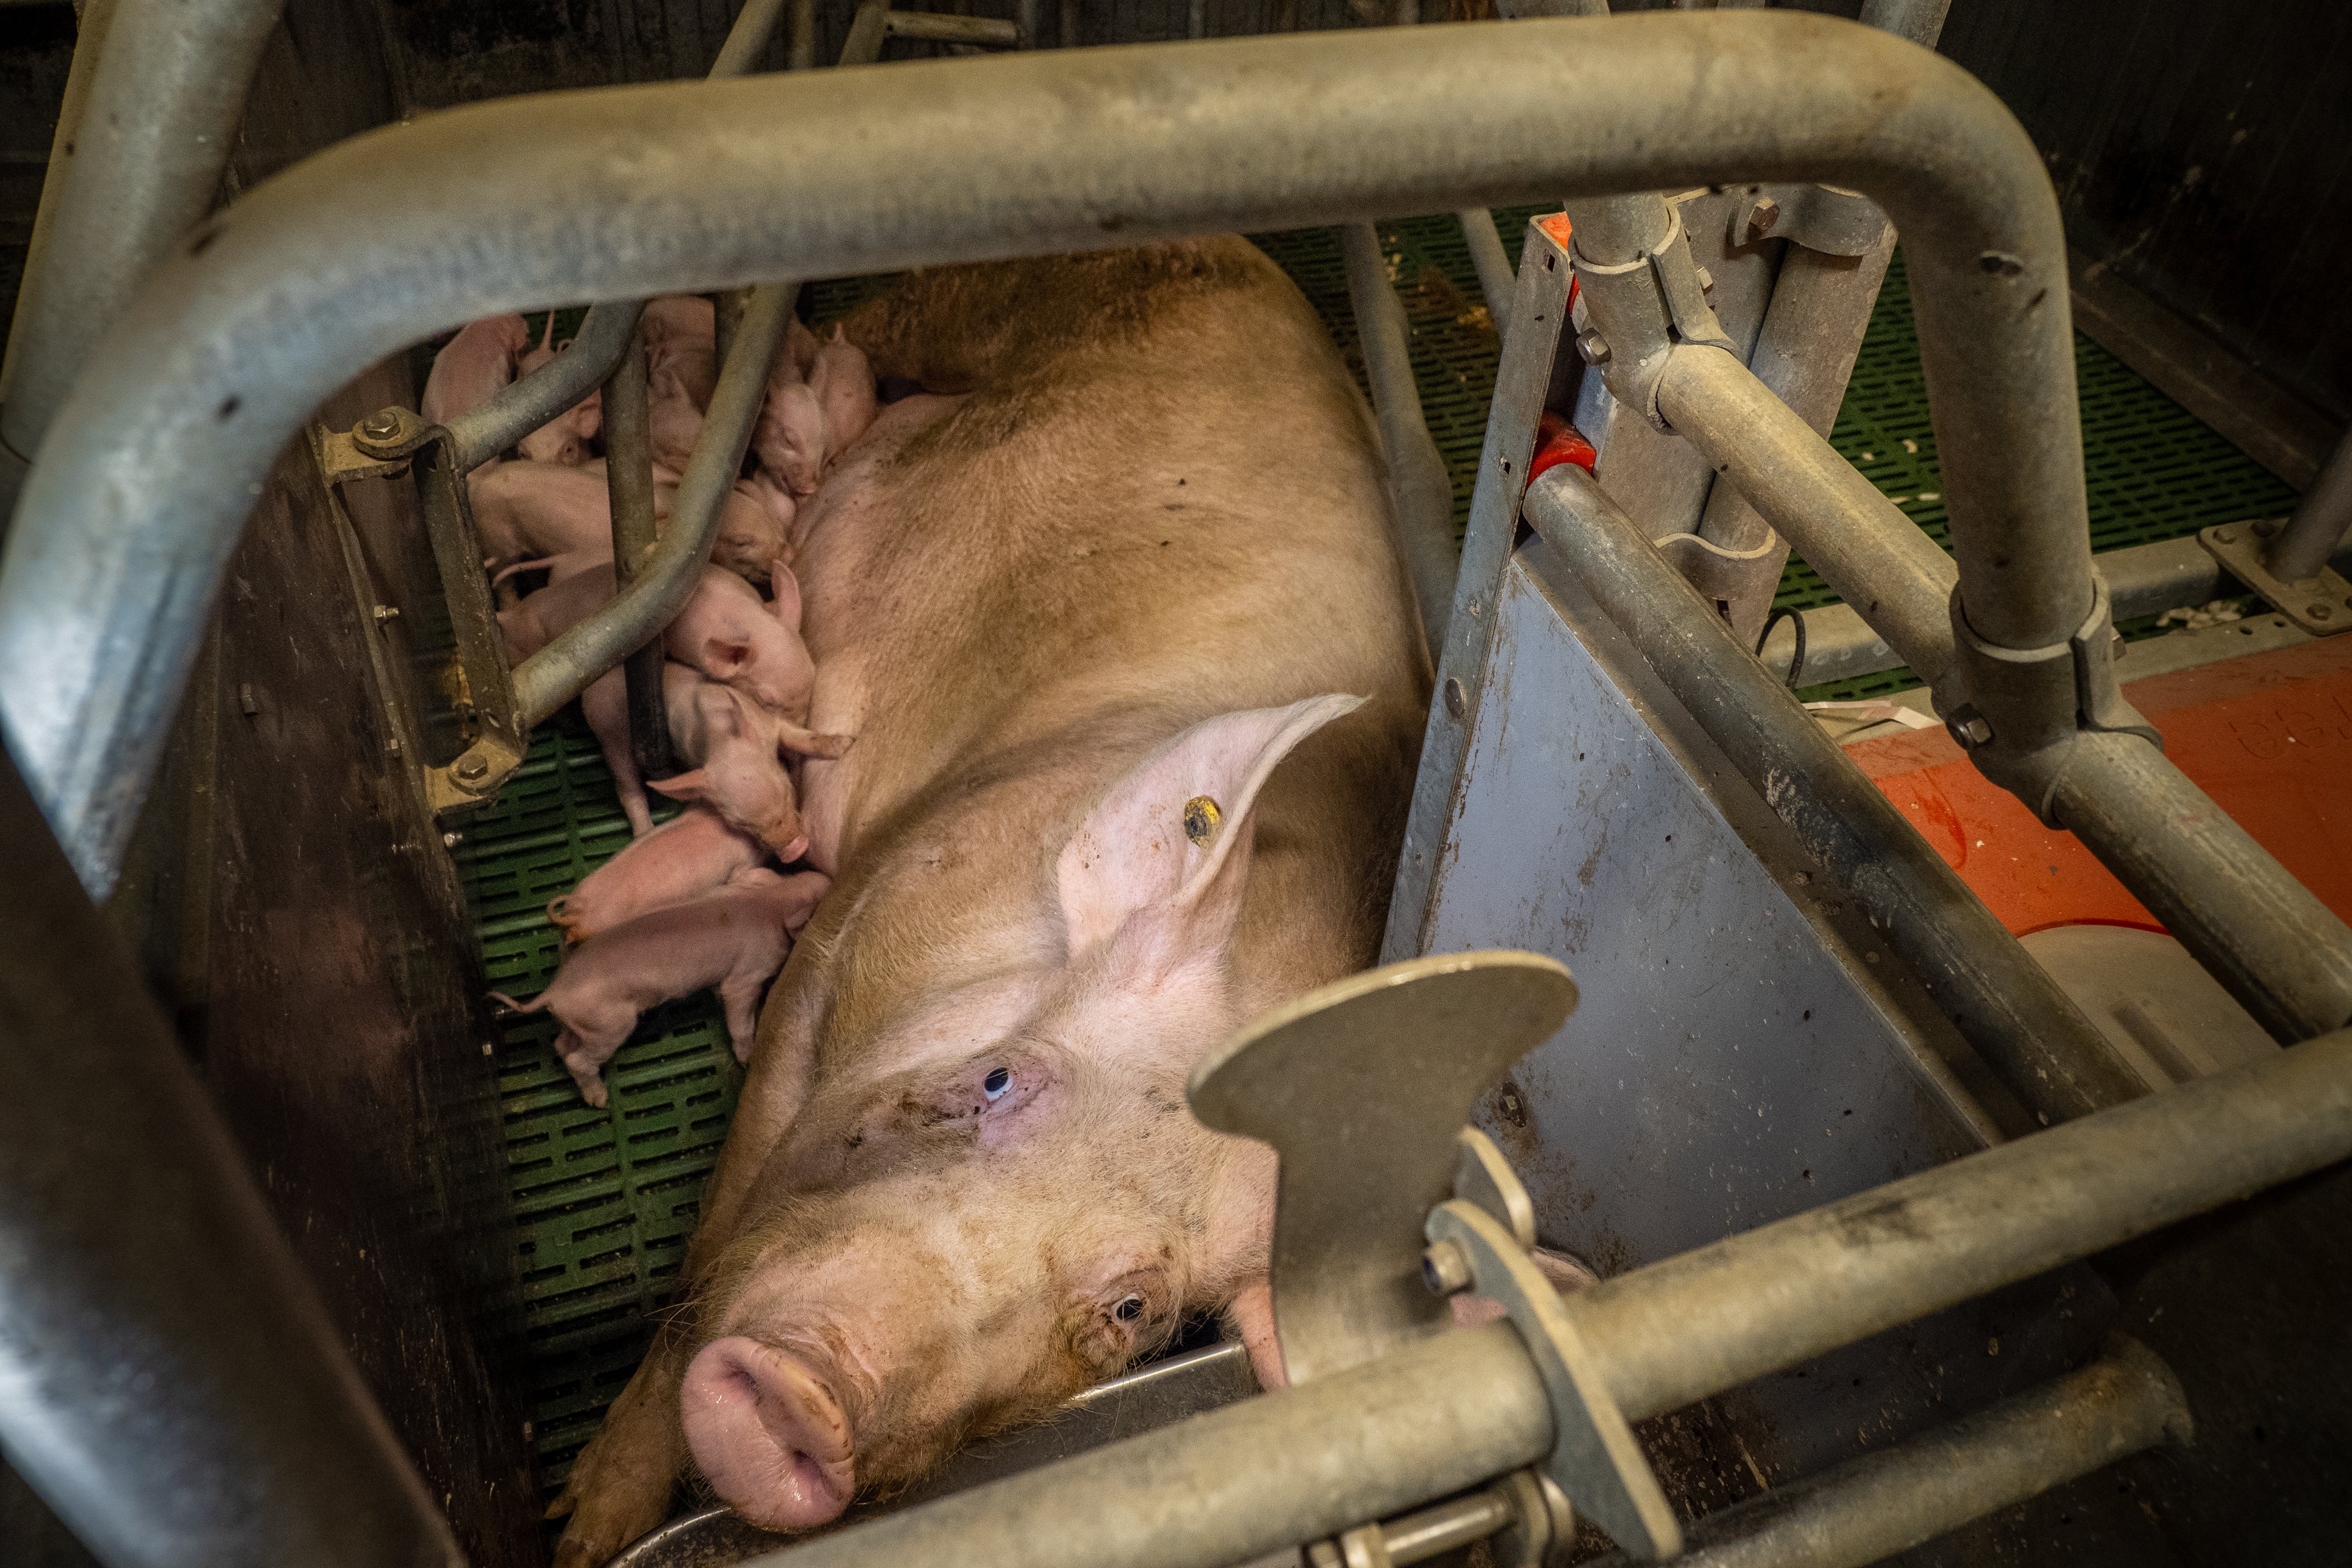 Video footage obtained by the group appears to show how sows are unable to properly nurture their young because of the restrictions of the cage.